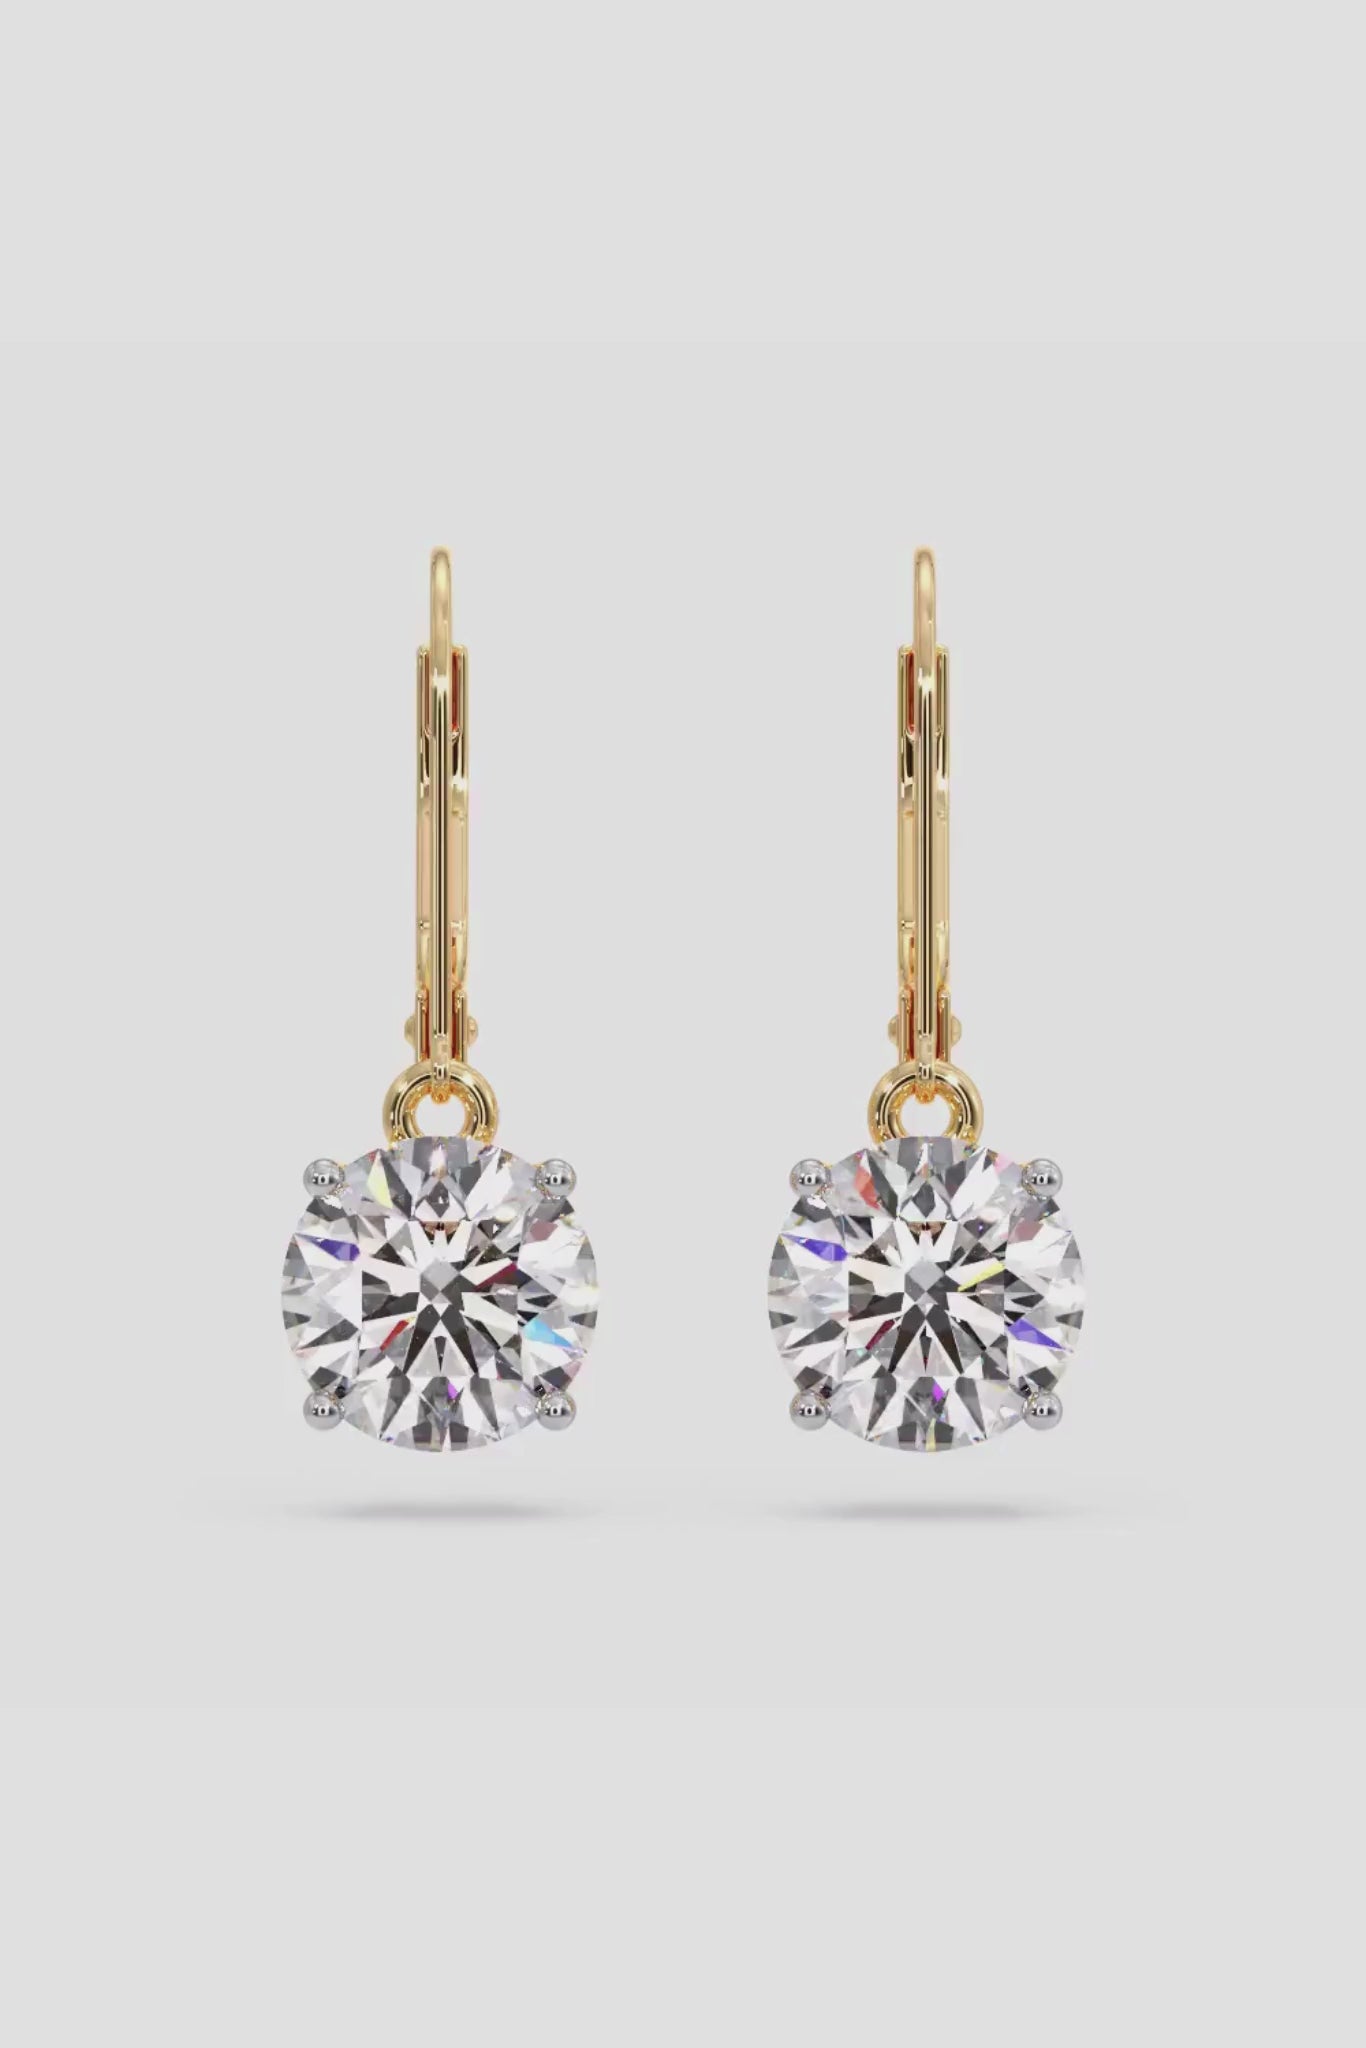 4 ct Solitaire Lever-Back Earrings